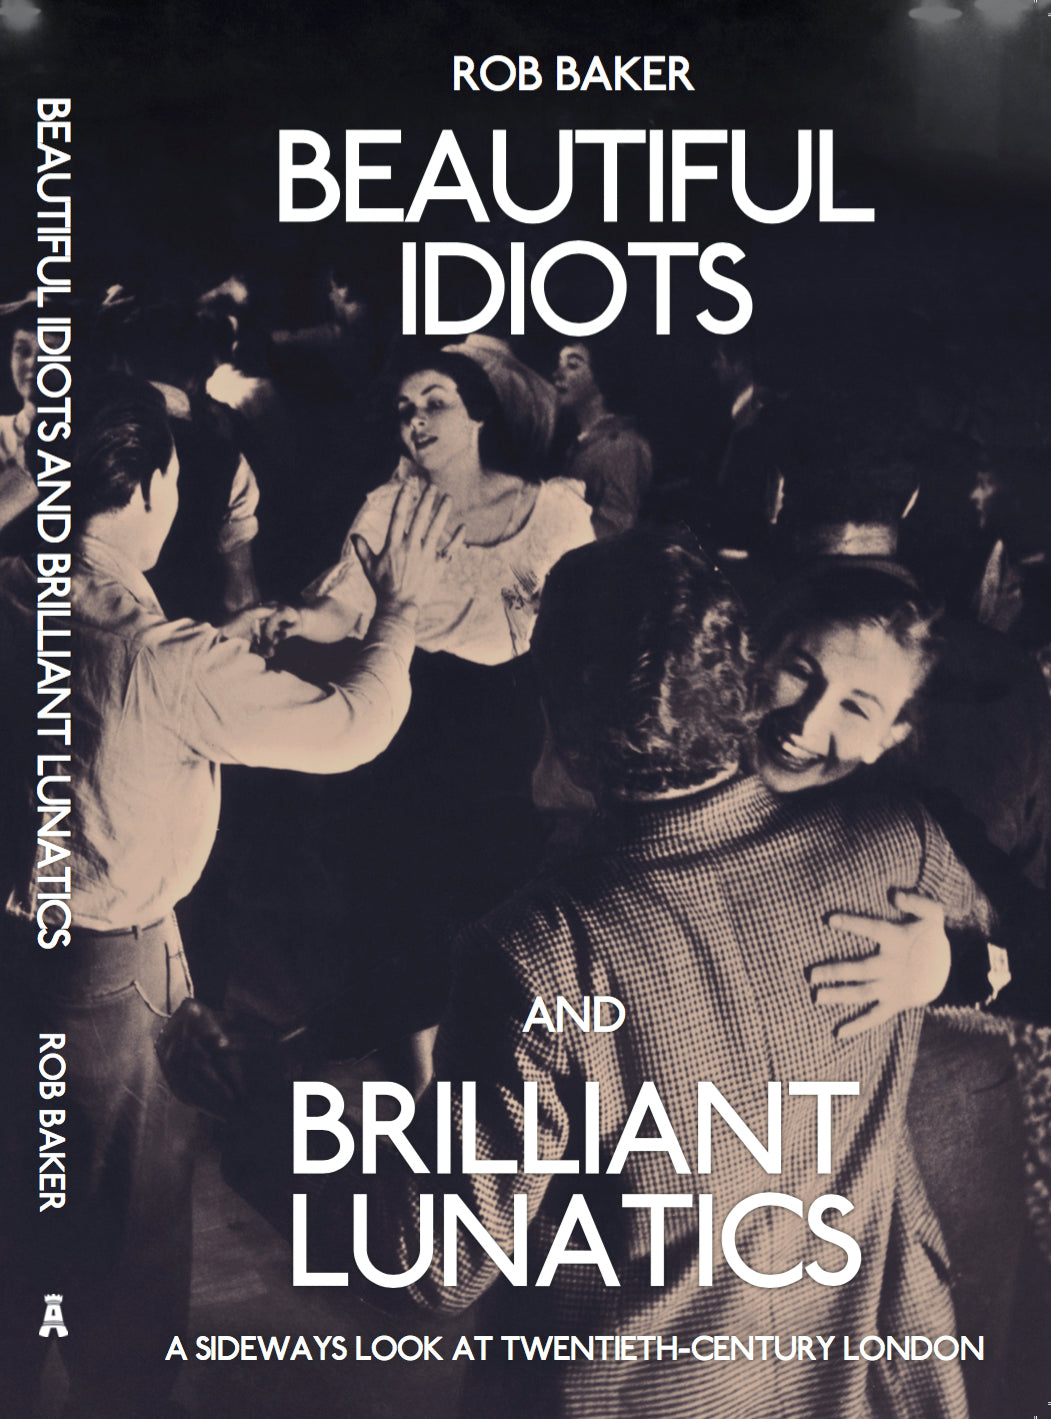 Beautiful Idiots and Brilliant Lunatics - signed by author Rob Baker